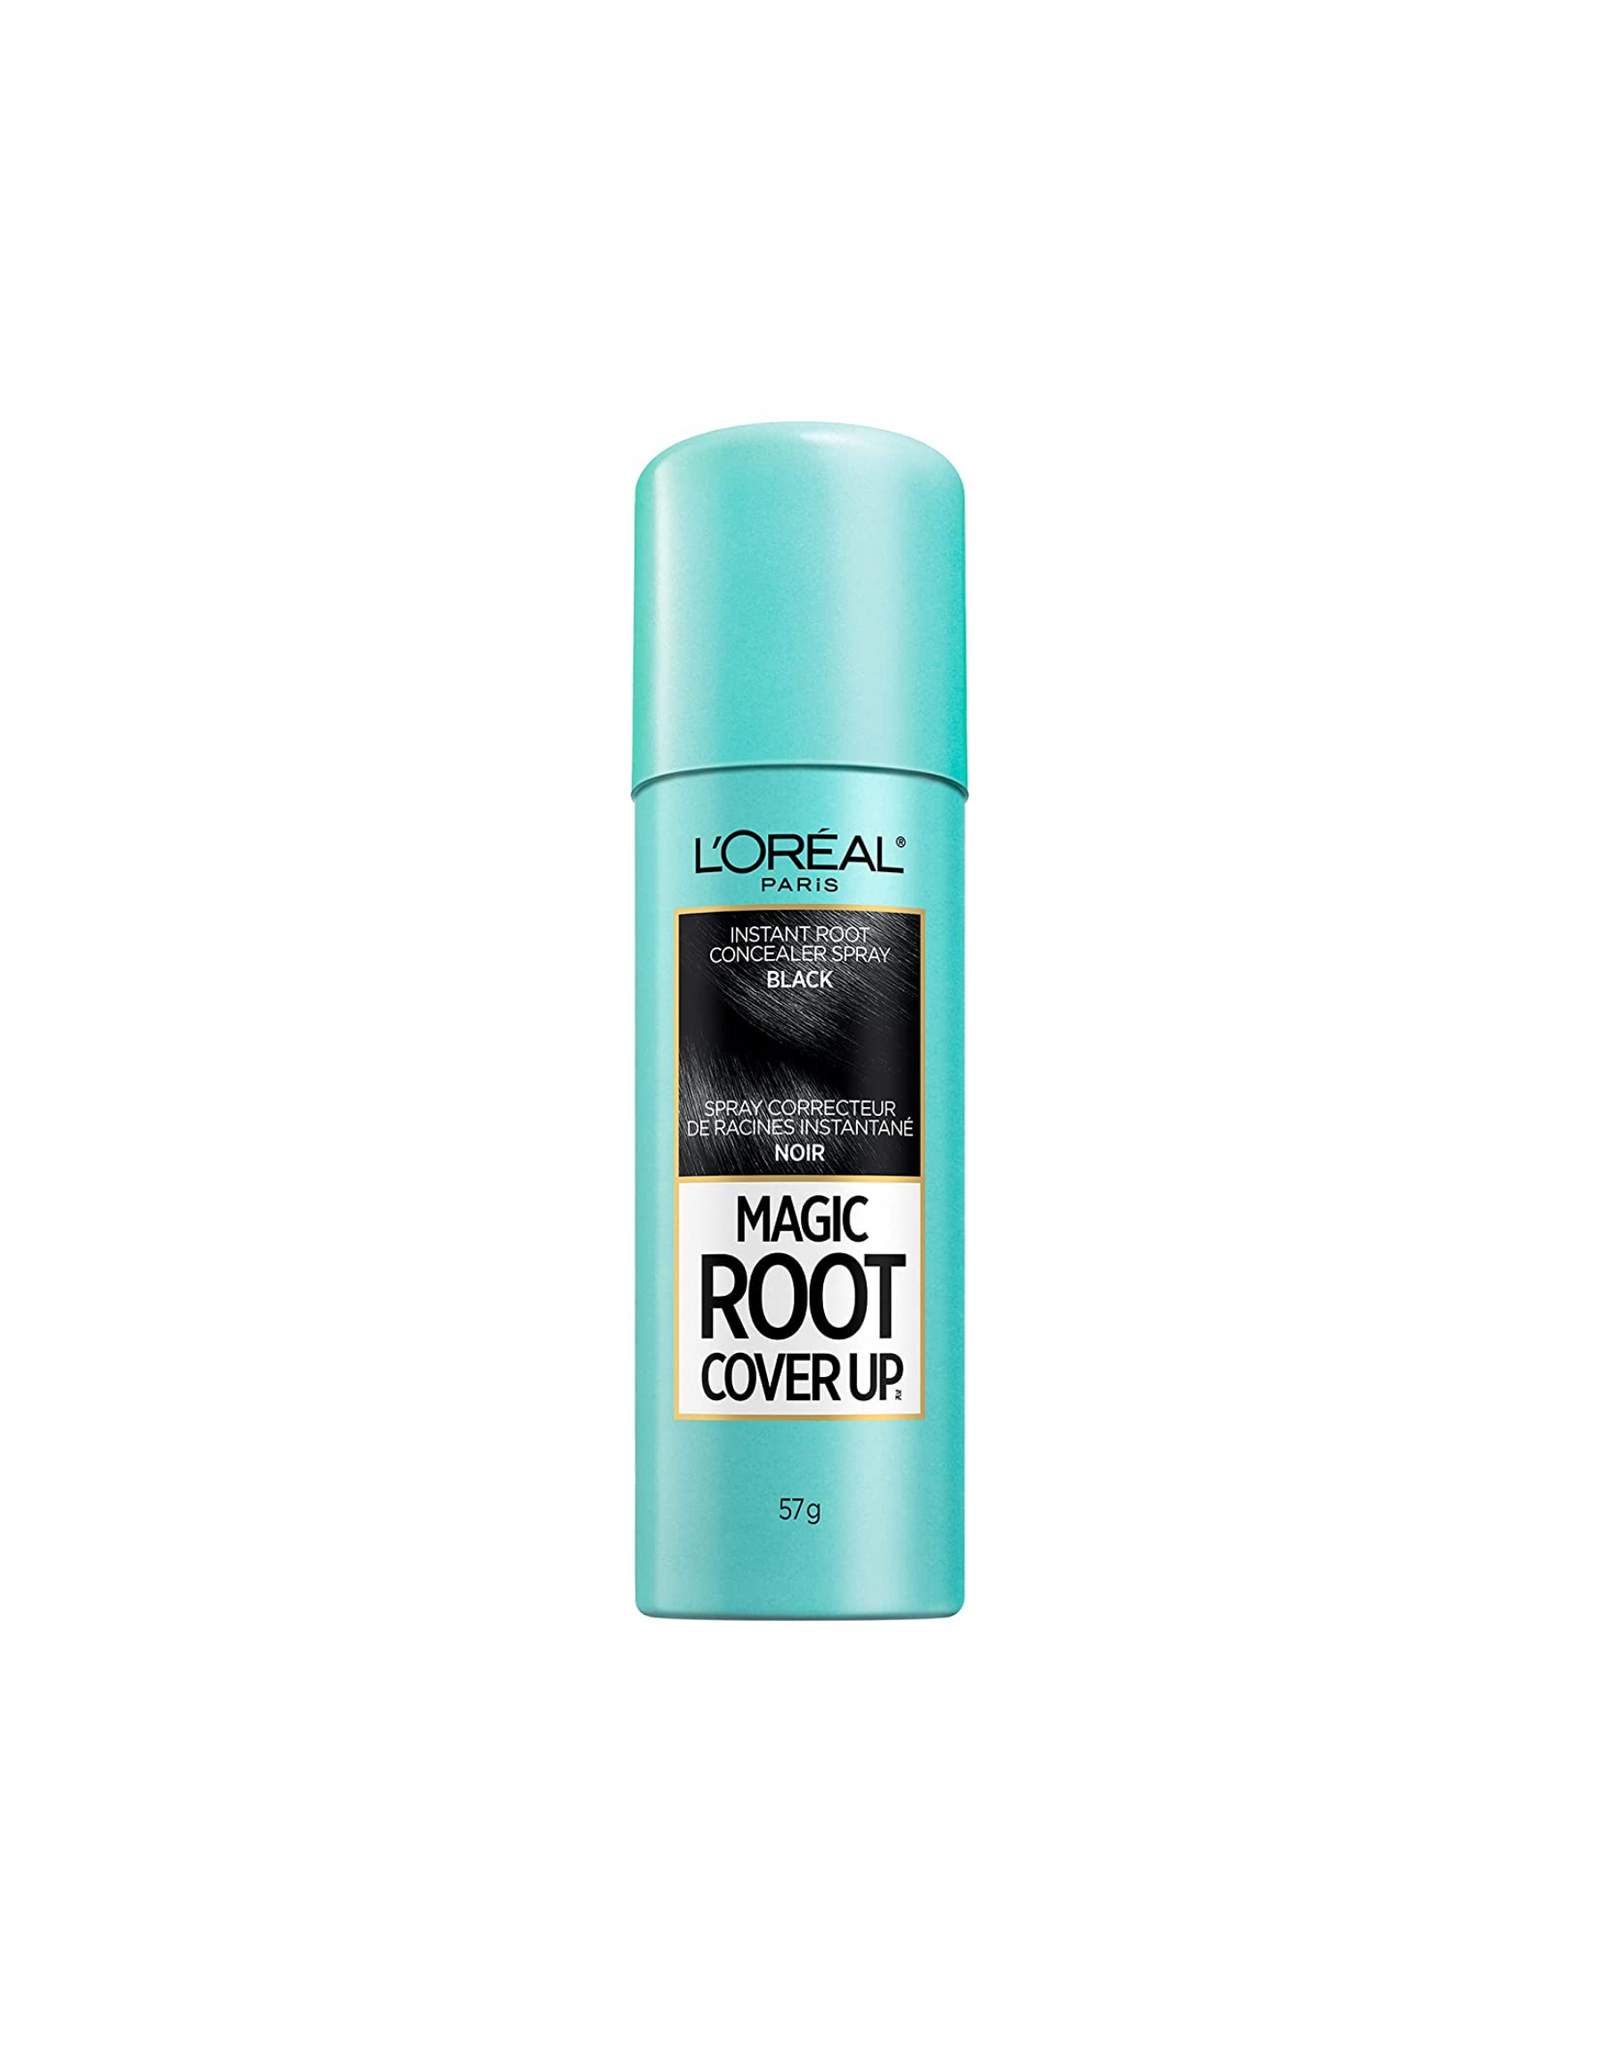 L'Oreal Paris Magic Root Cover Up Instant Root Concealer Spray, Black, 2 oz (Pack of 1)